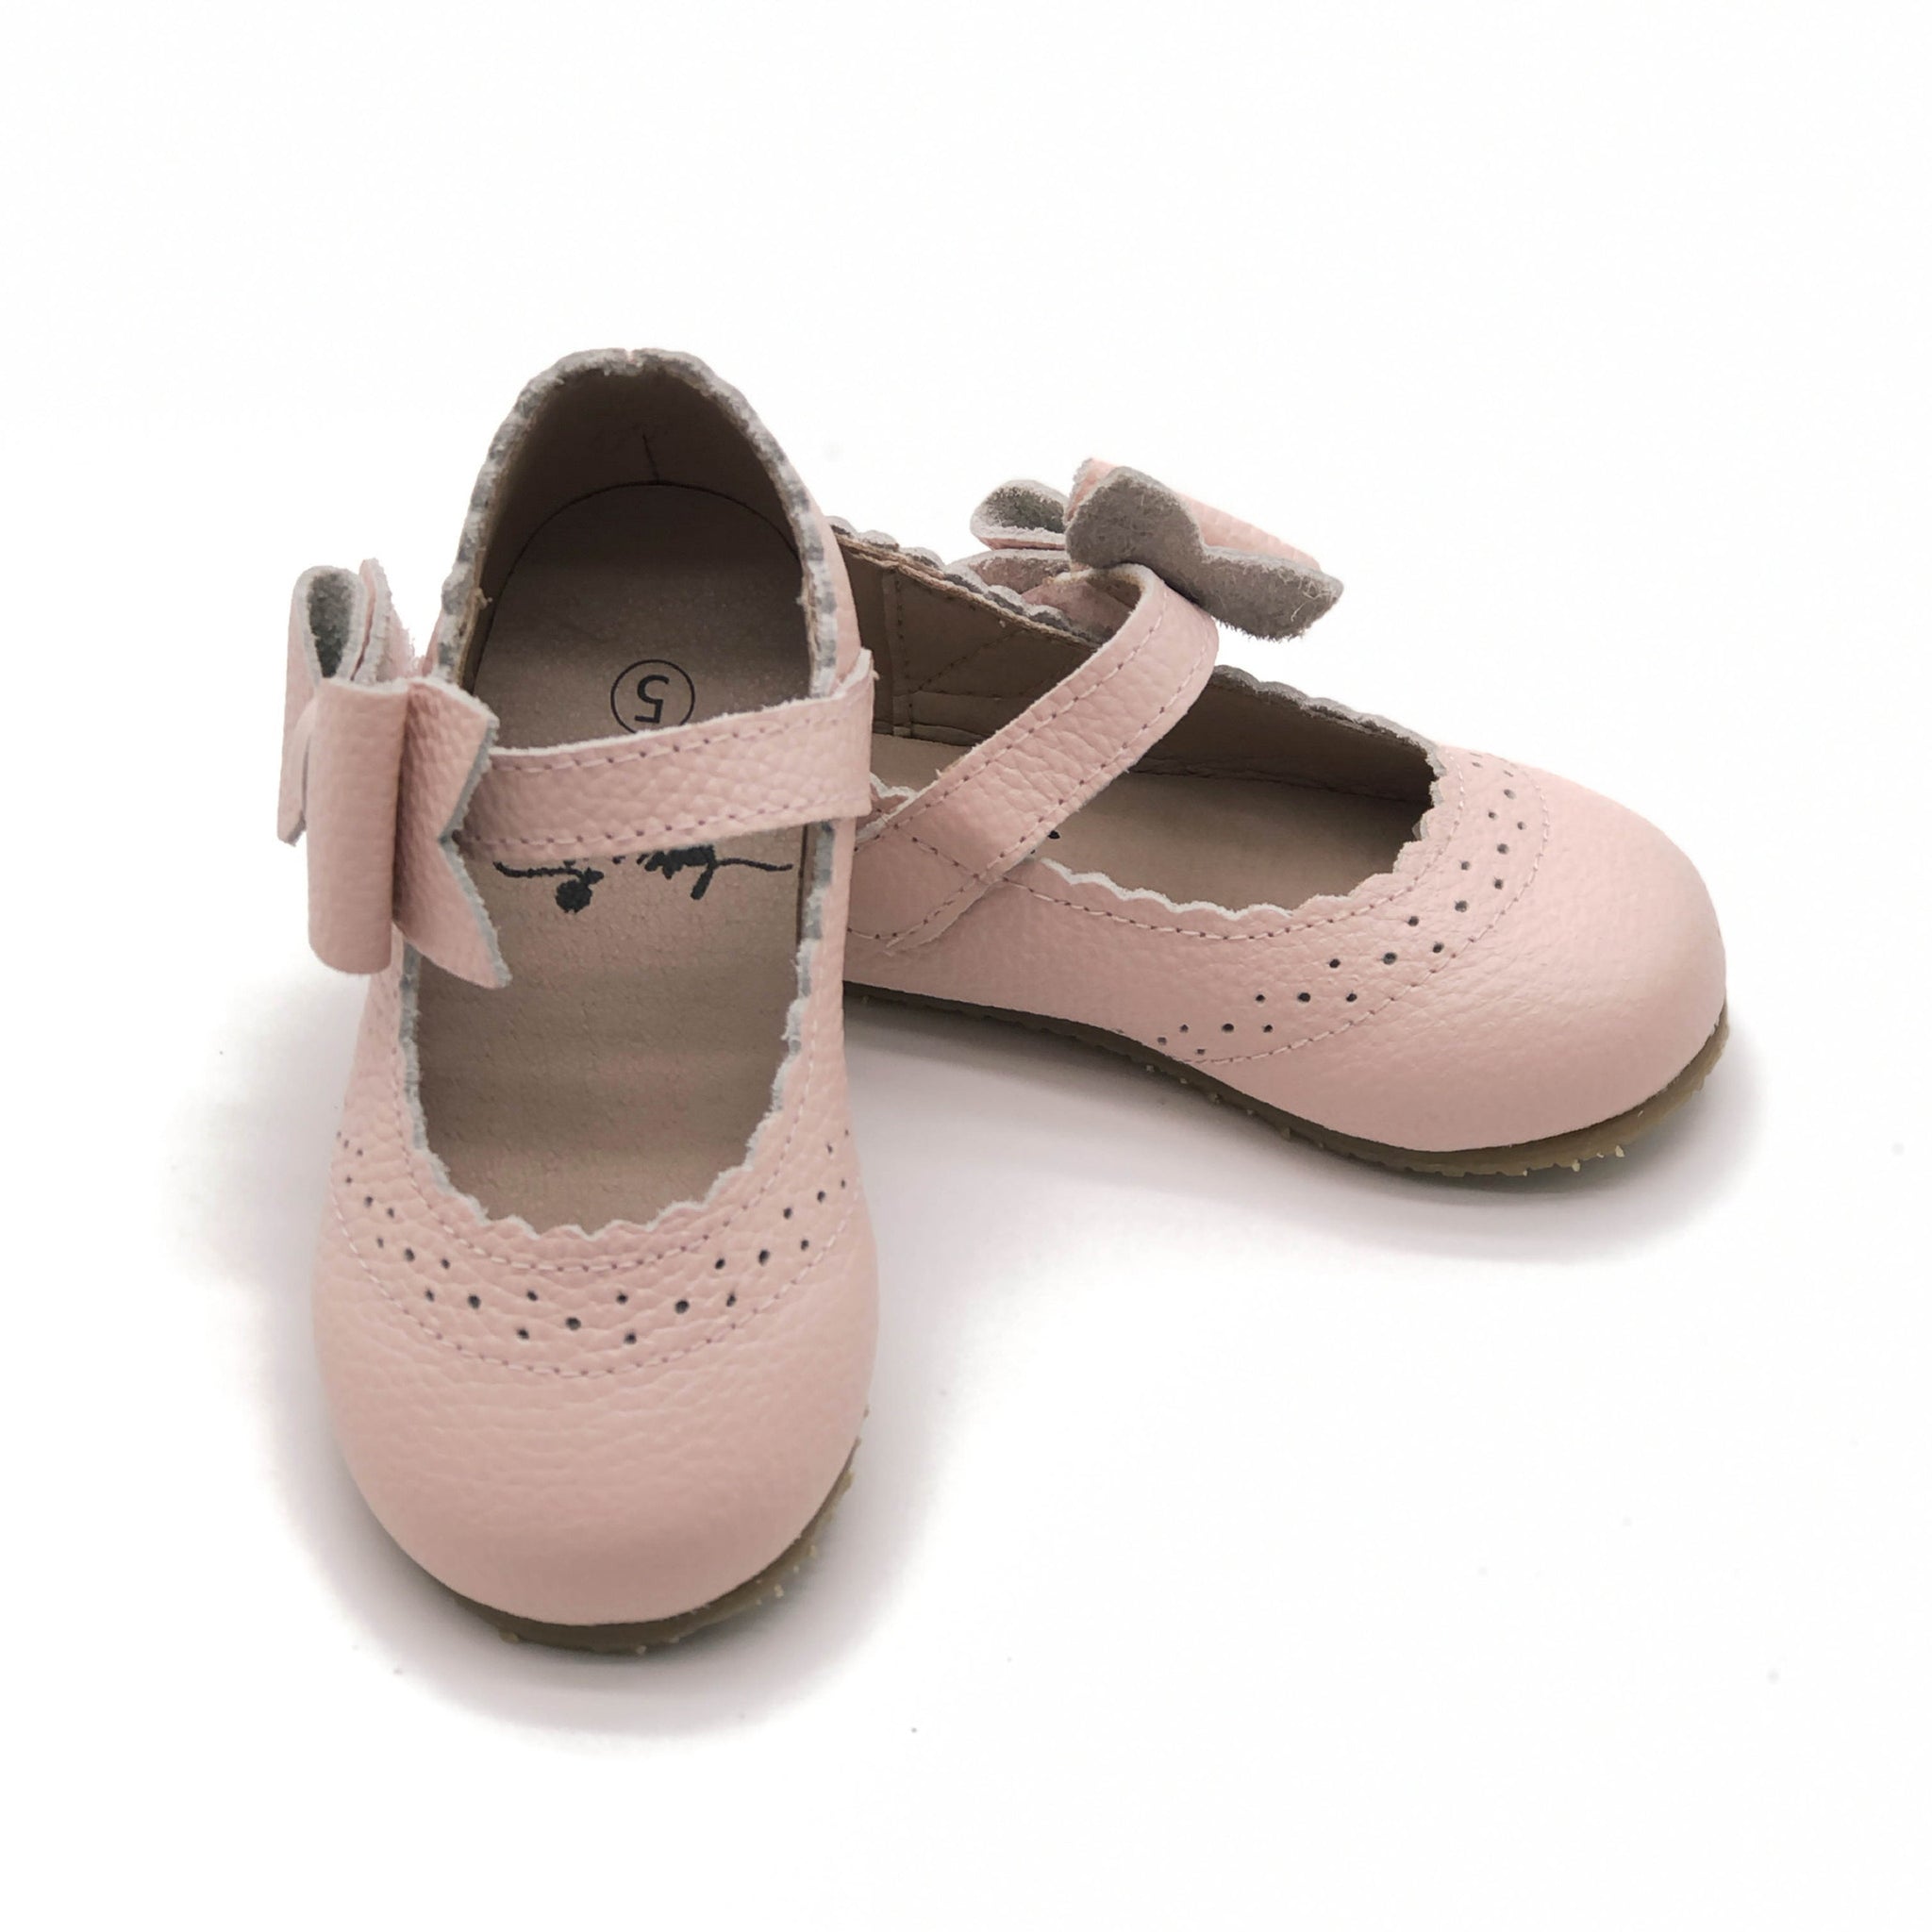 Pink Bow Mary Jane Shoes - Love and Grow Clothing Co